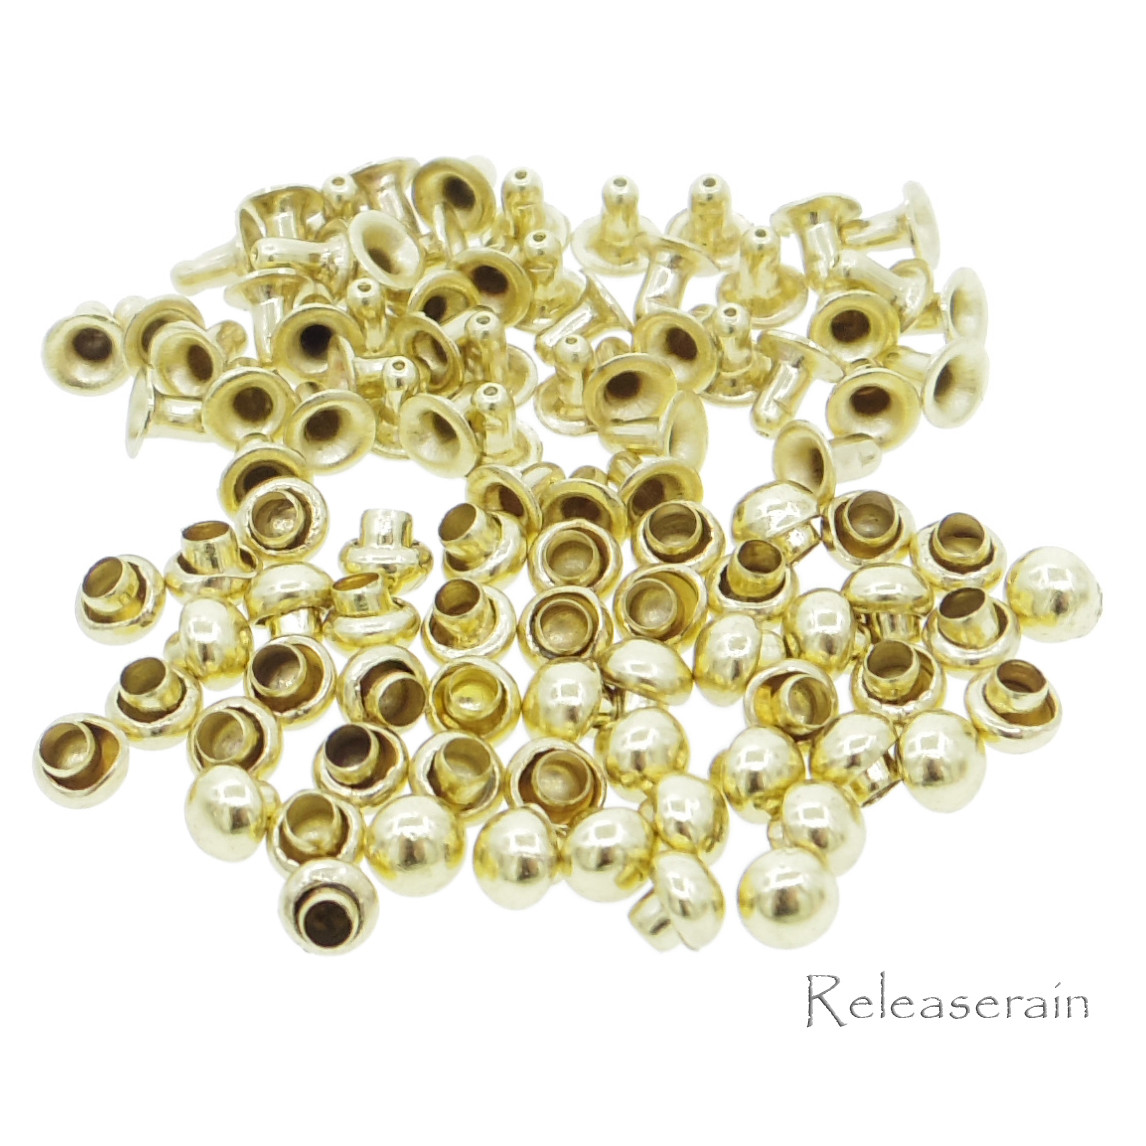 3mm Tiny Gold Brass Mushroom Round Dome Rivets For DIY Doll Clothes Sewing  Craft 50 Sets - Releaserain